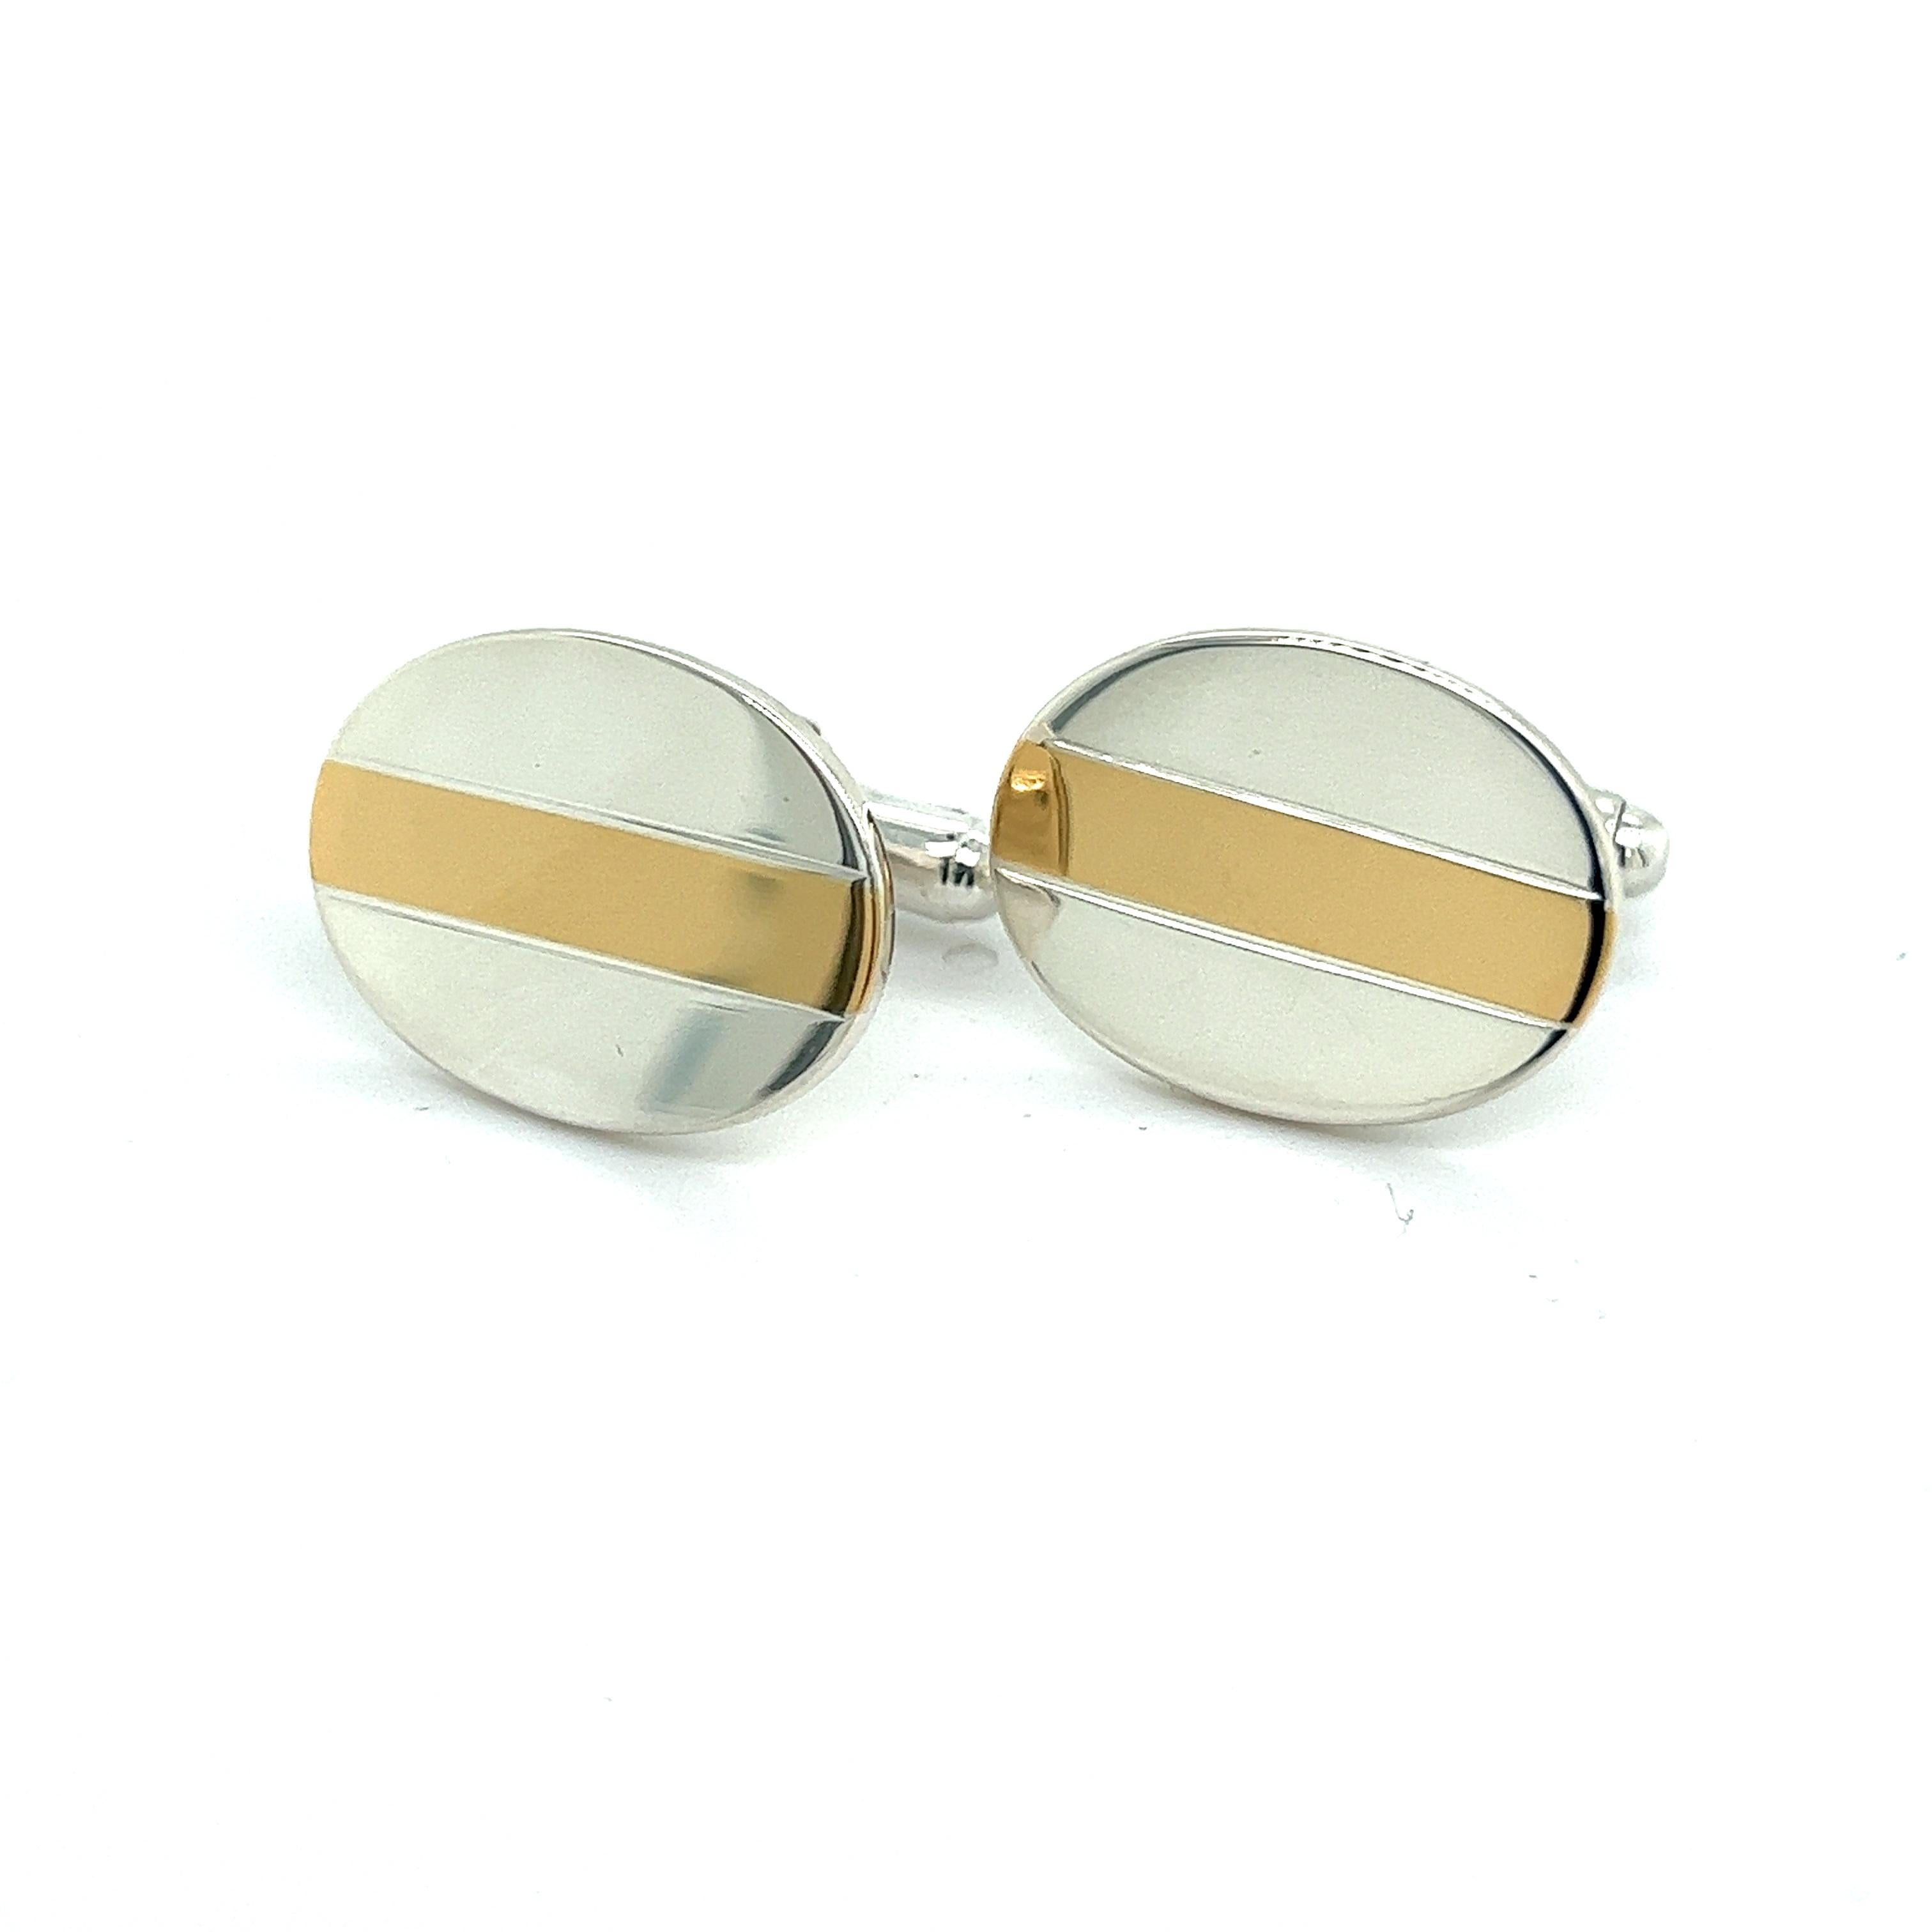 Tiffany & Co Estate Cufflinks 18k Y Gold + Sterling Silver In Good Condition For Sale In Brooklyn, NY